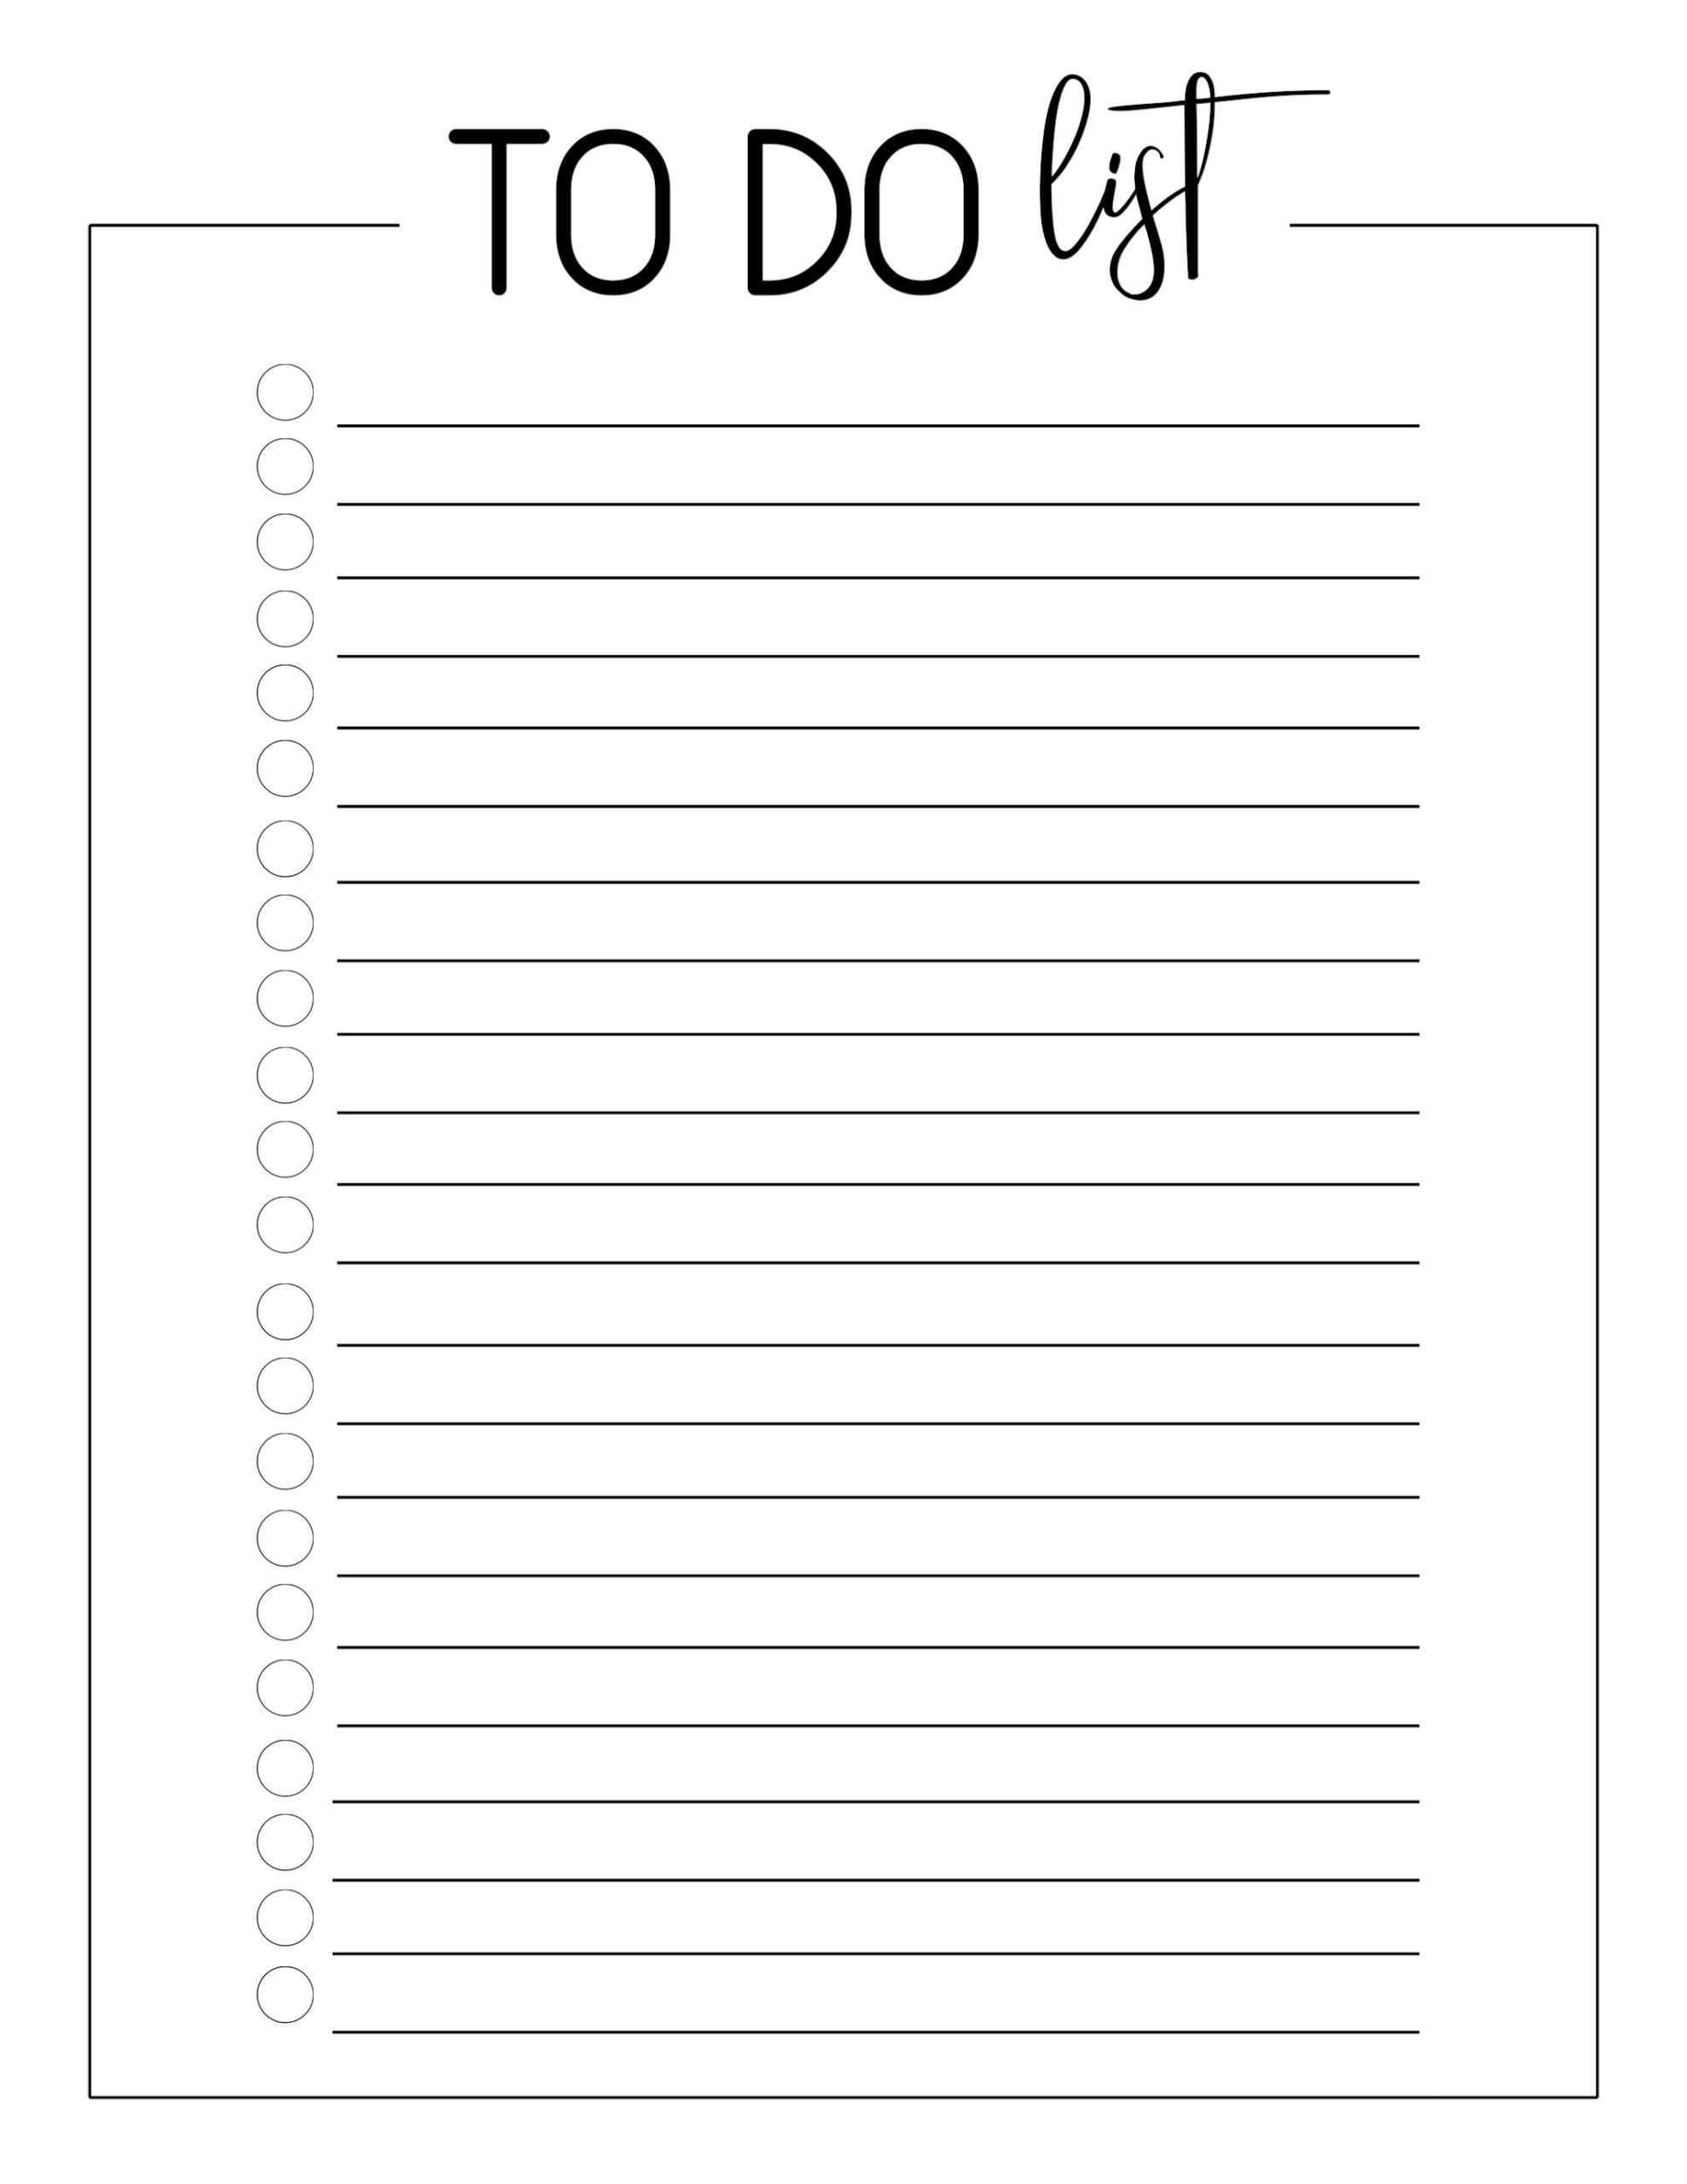 3Cf515 Blank Checklist Templates | Wiring Library With Regard To Blank To Do List Template